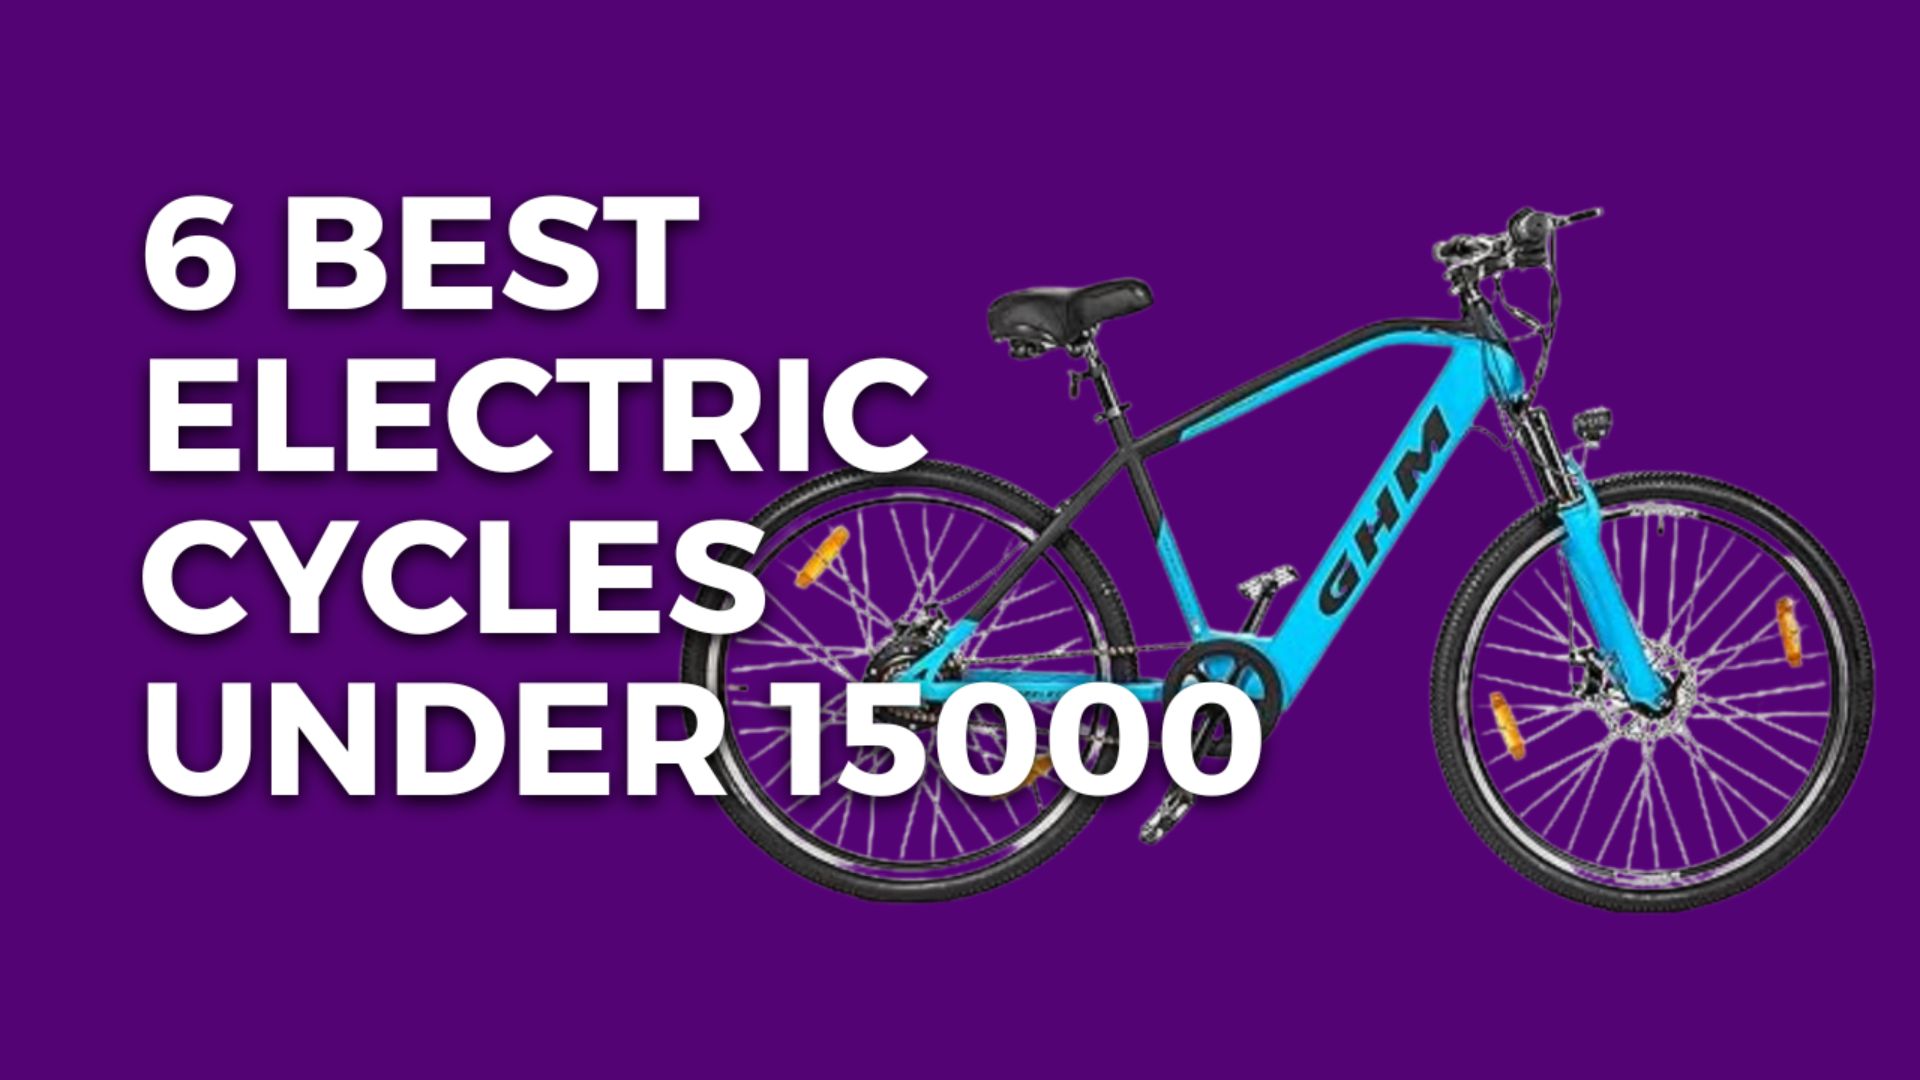 6 Best Electric Cycles Under 15000